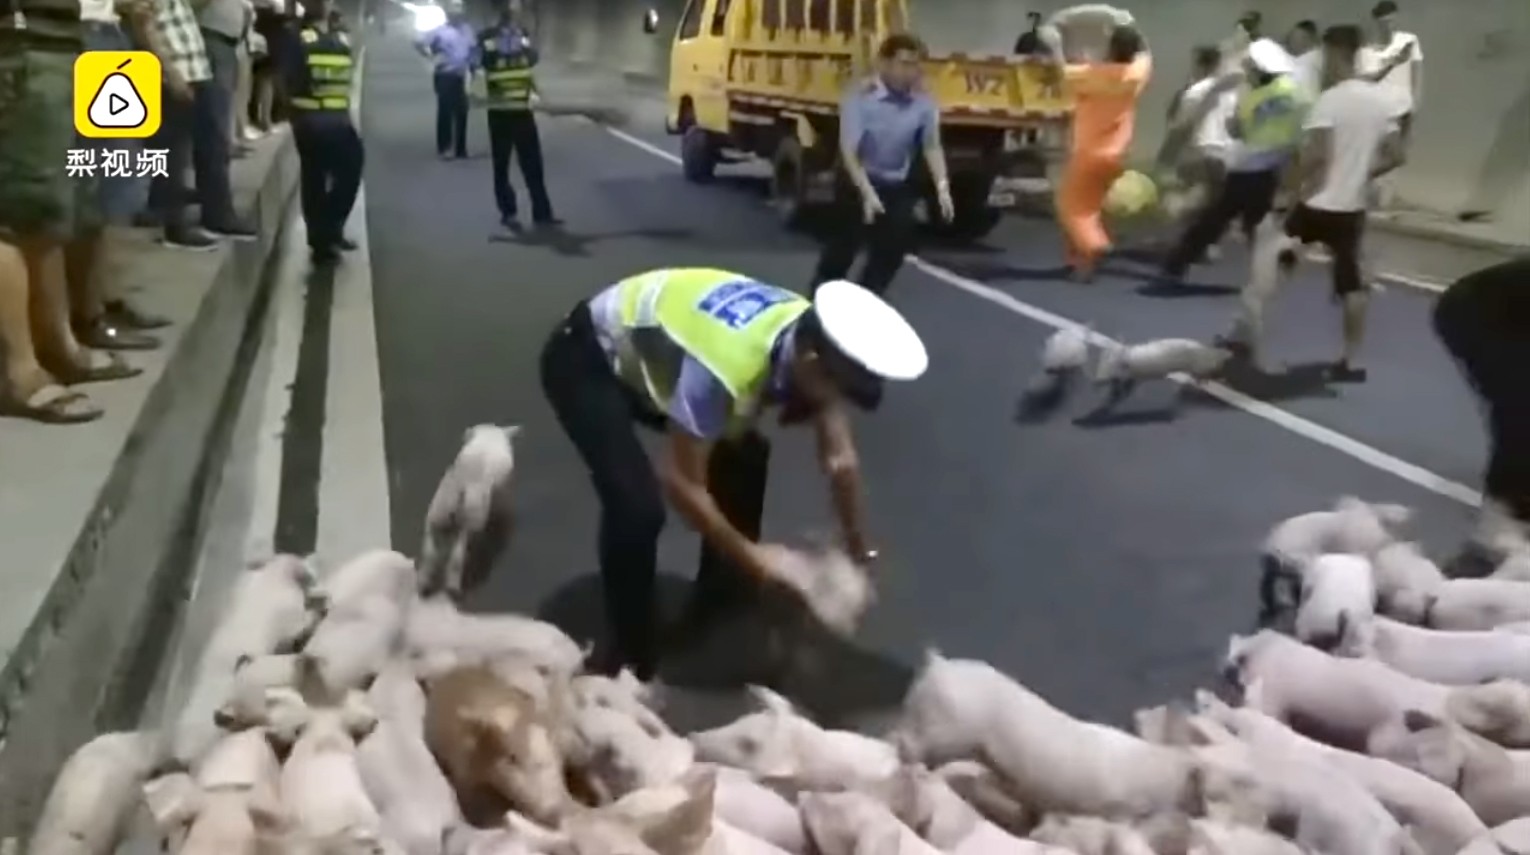 The piglets ran lose in a tunnel after escaping from the lorry. Photo: Handout